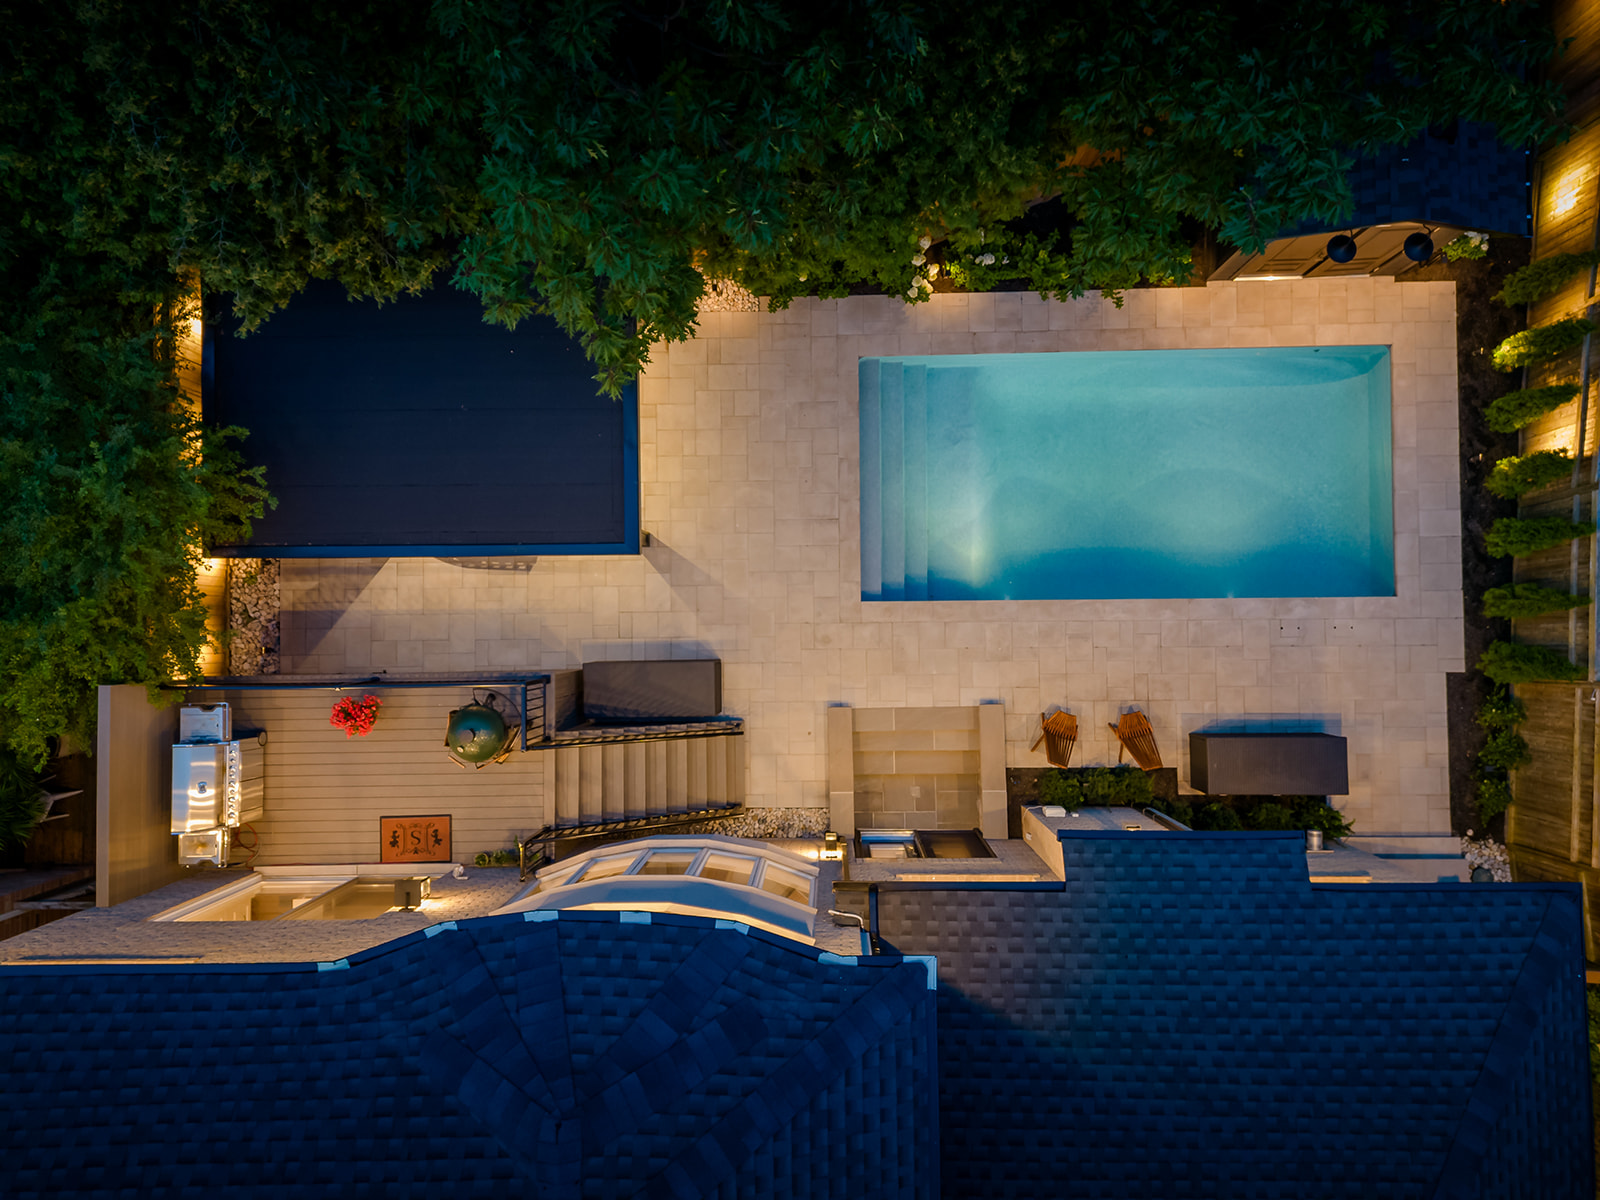 Top-down view of the backyard with the inground pool.